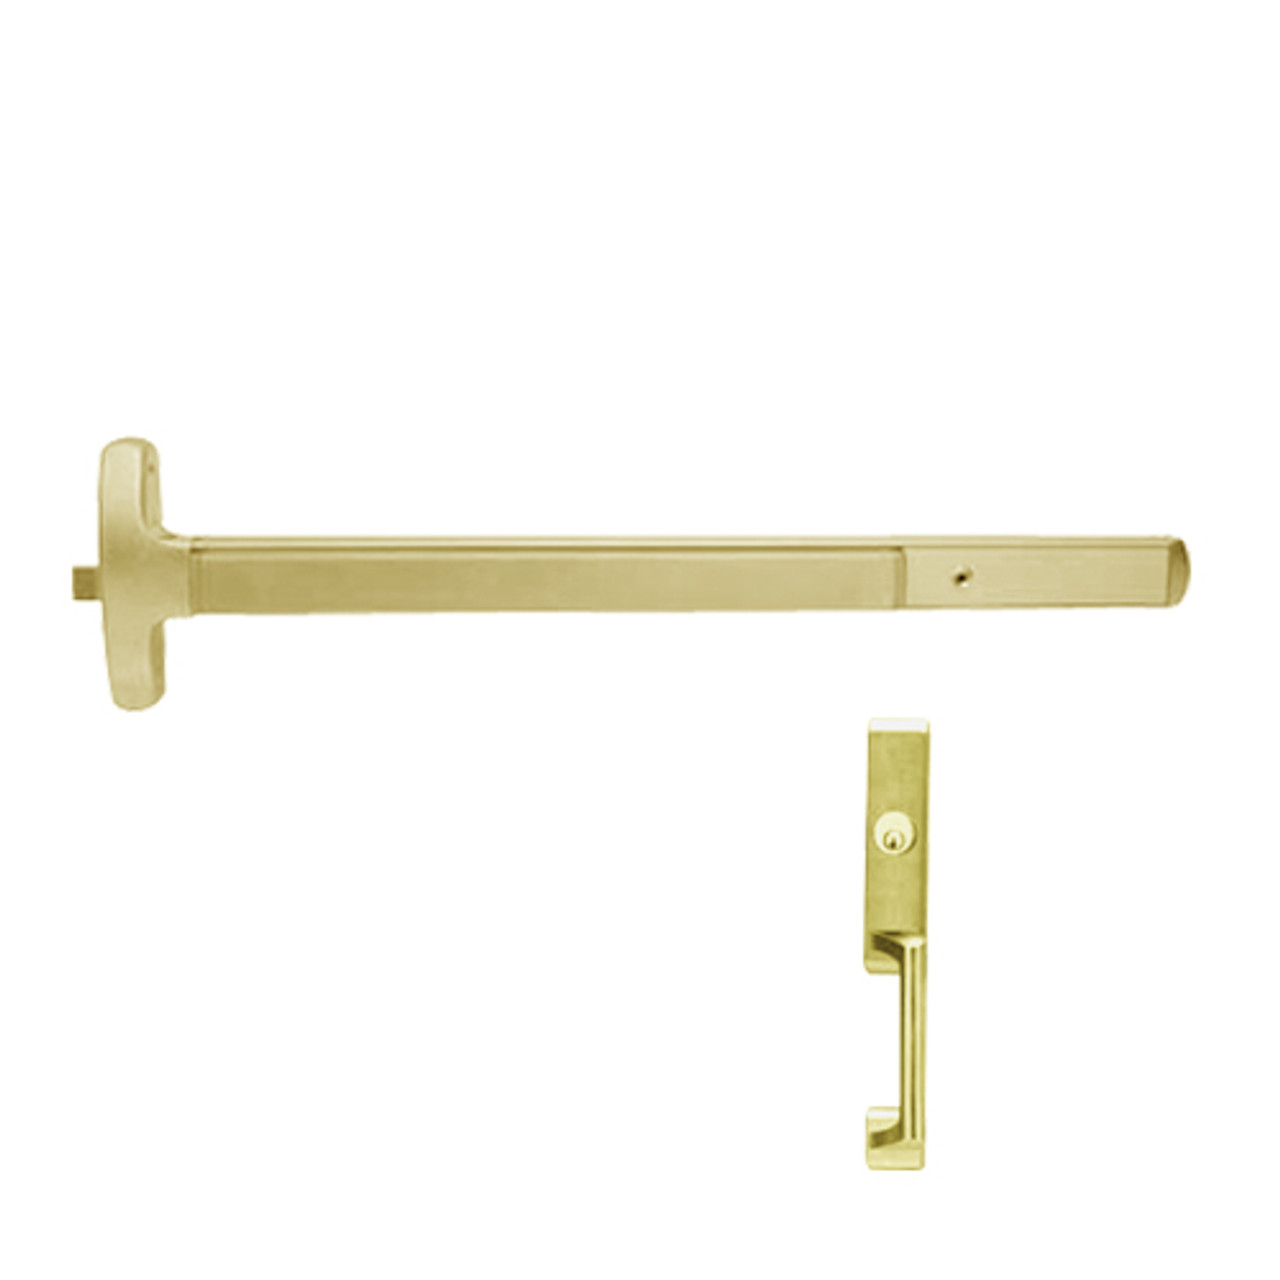 24-R-NL-US4-3-LHR Falcon Exit Device in Satin Brass